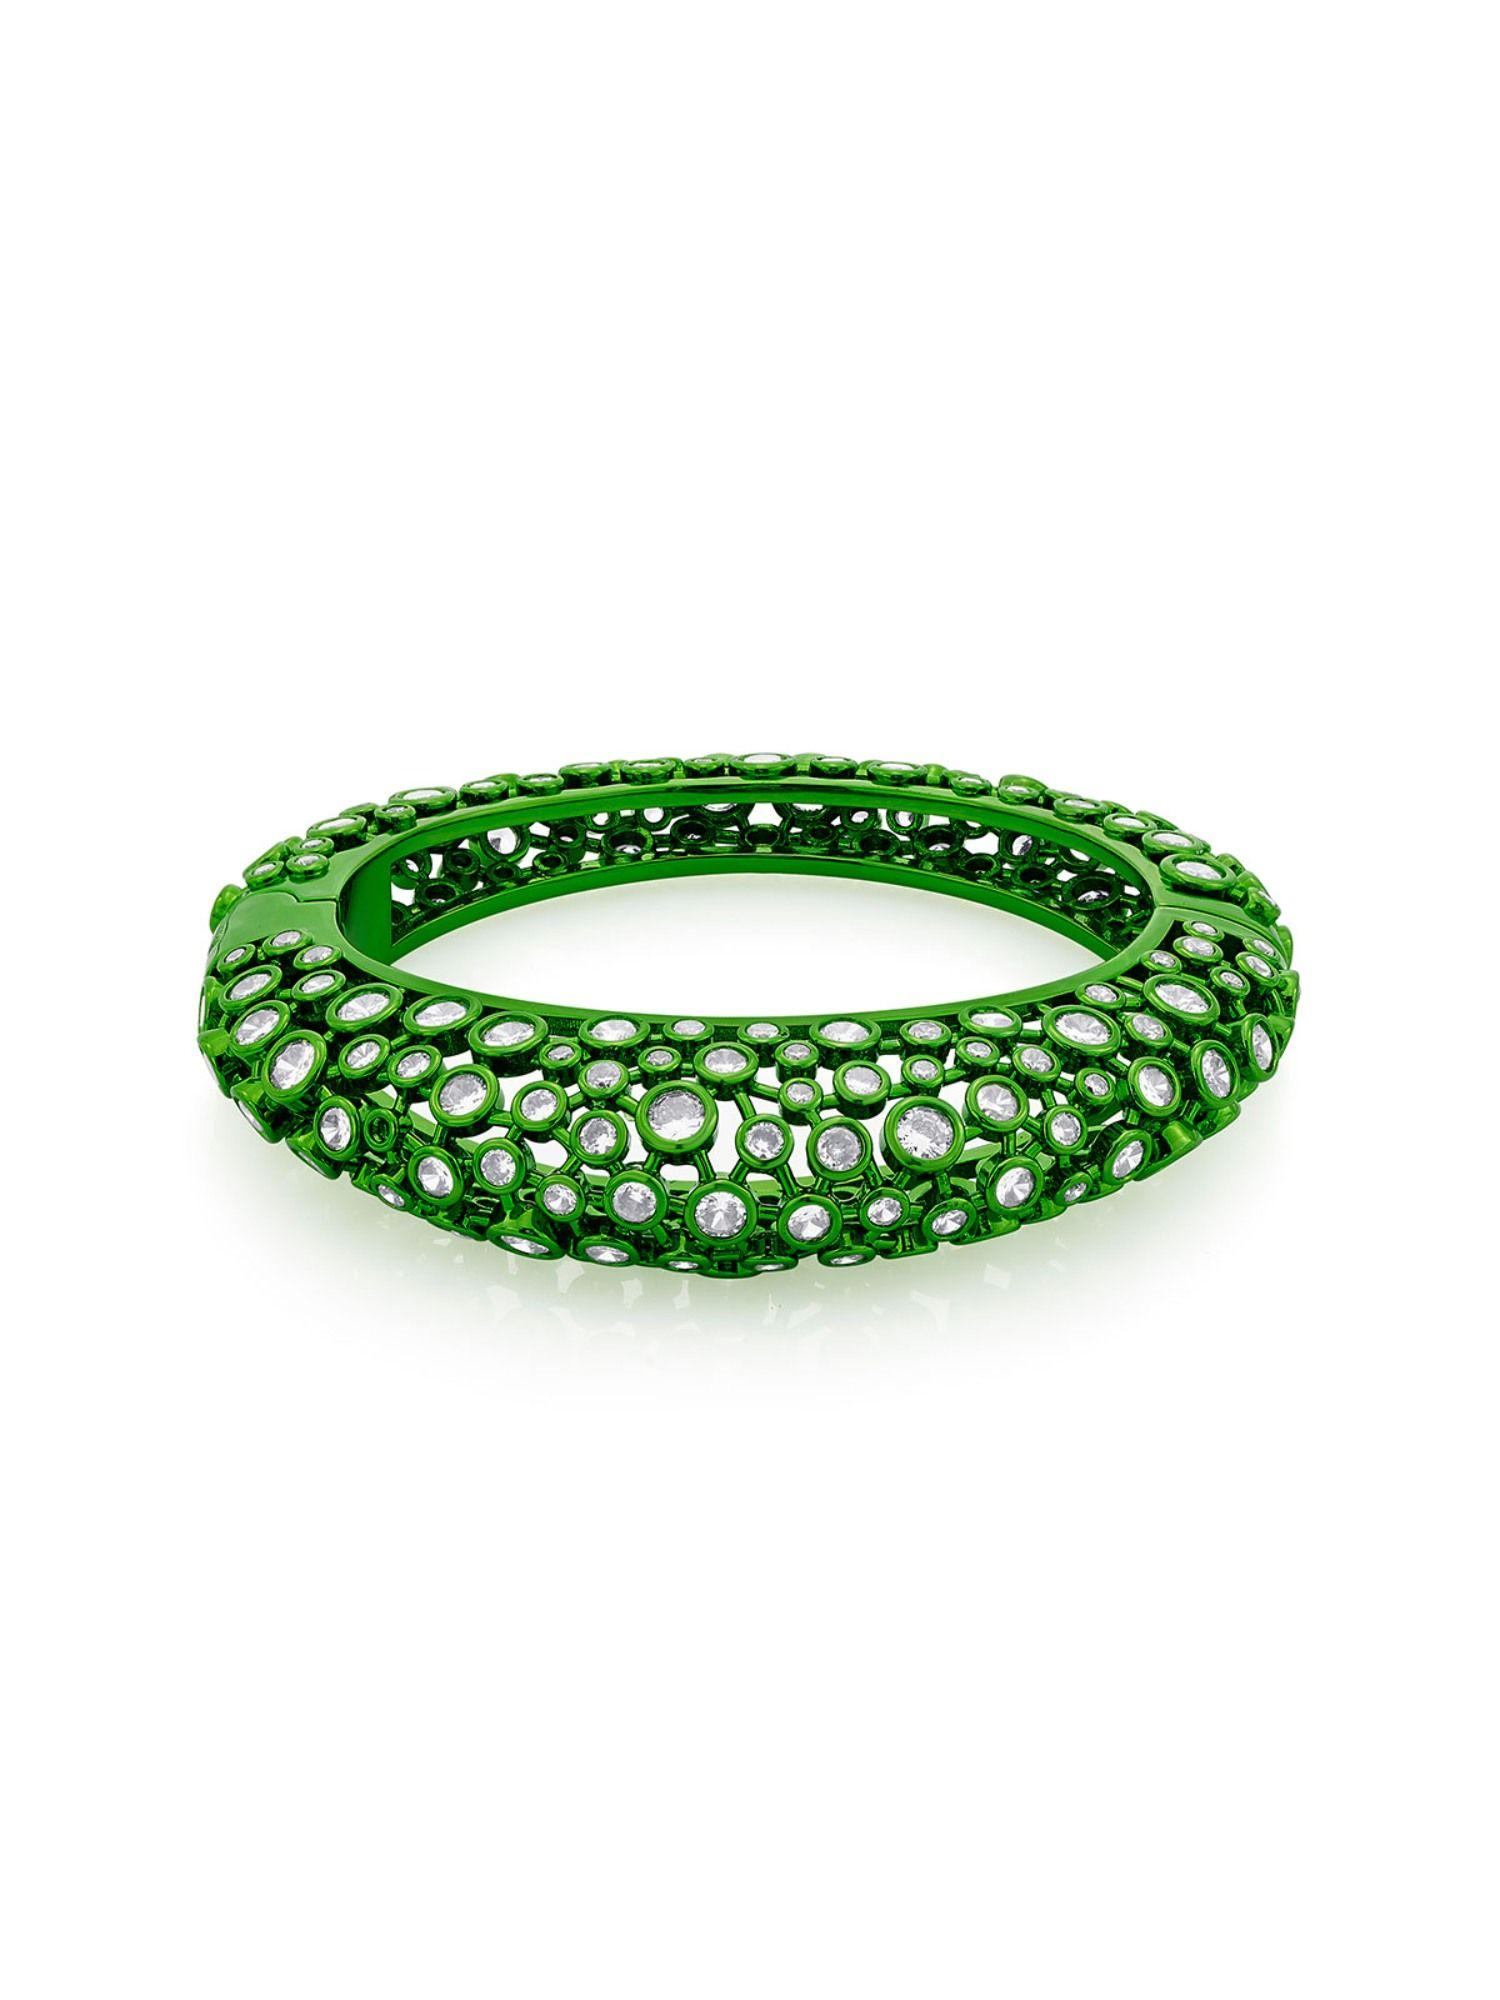 parakeet green oval hinge bangle in colored plating